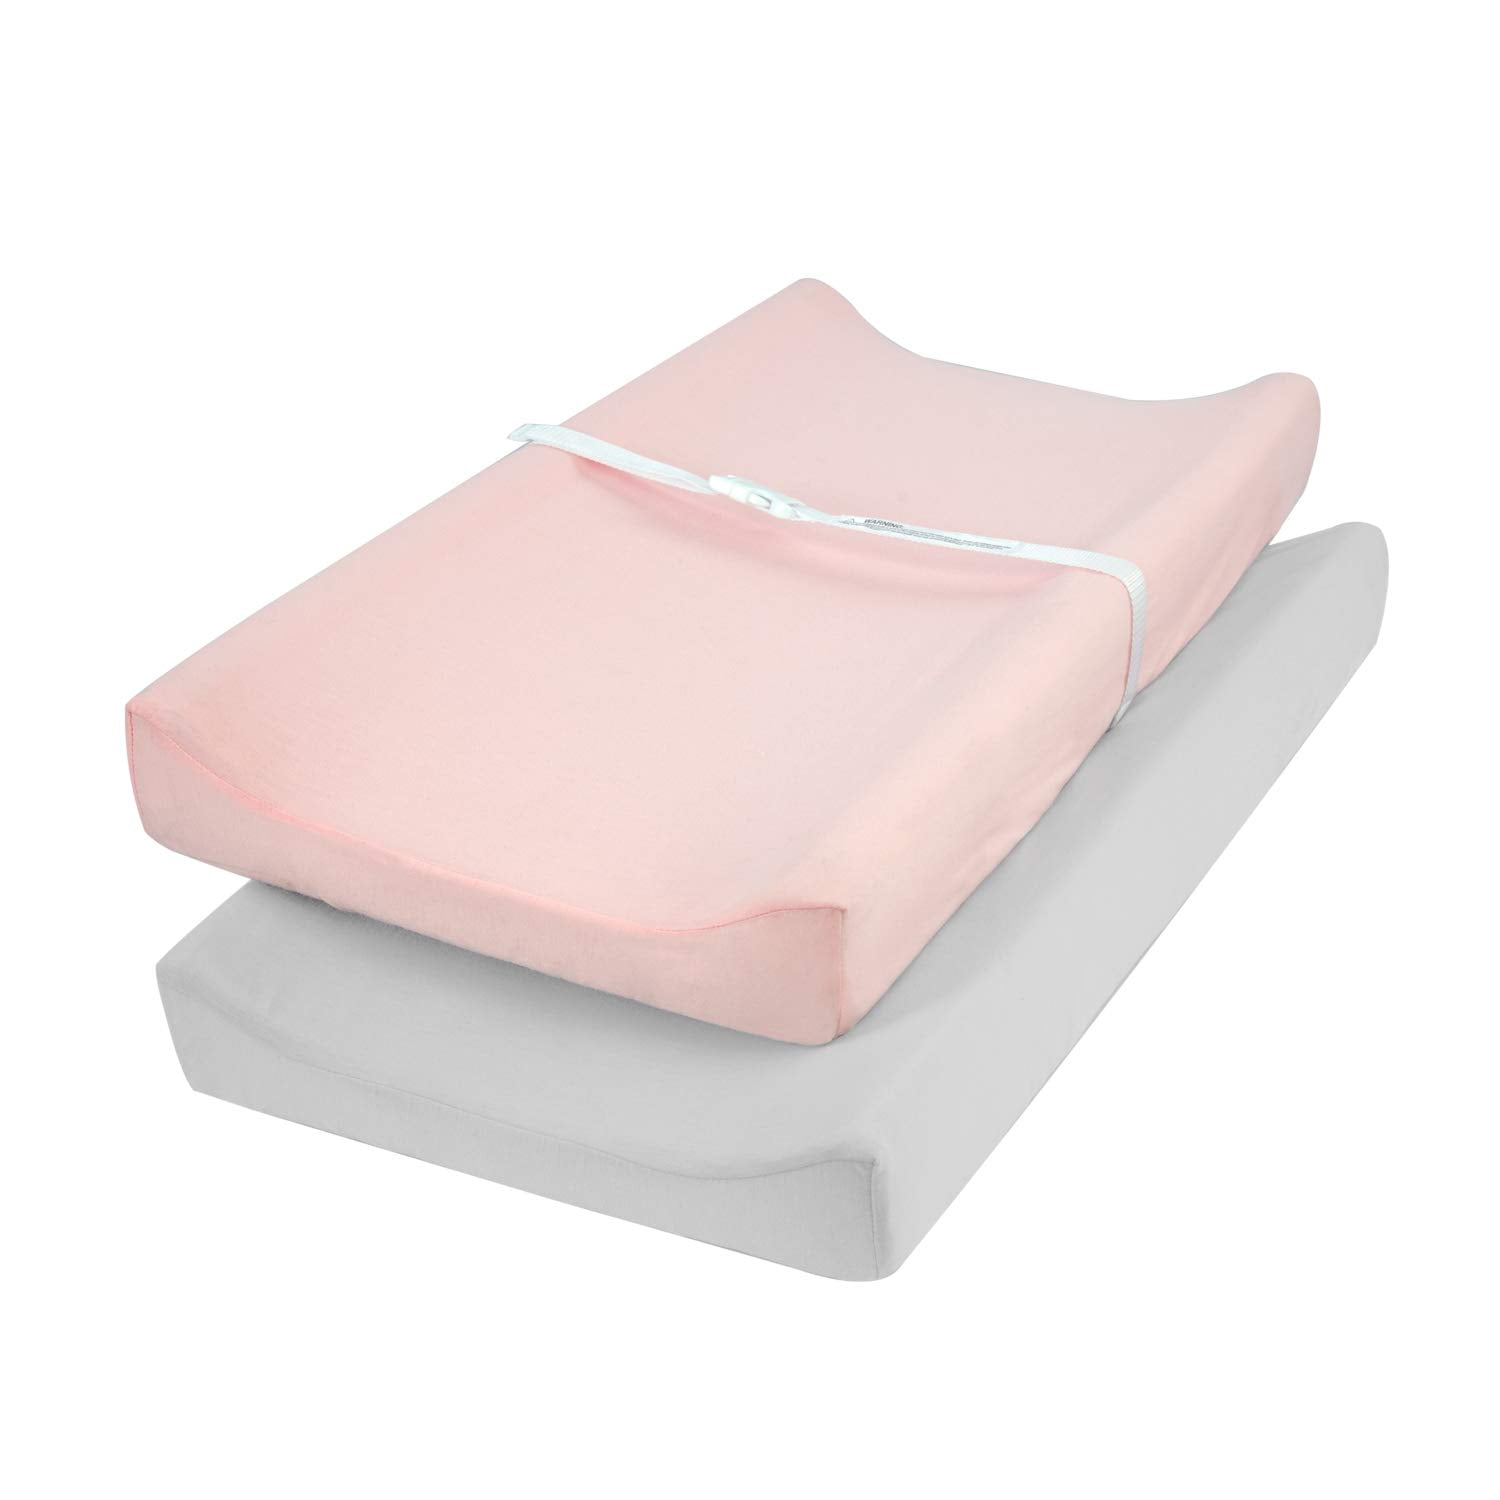 Super Soft Breathable Cozy Baby Cradle Sheet 32x16 Flexible for Different Cradle and Bassinet Mattress Peachy Pink TILLYOU Jersey Knit Soft Bassinet Sheets 